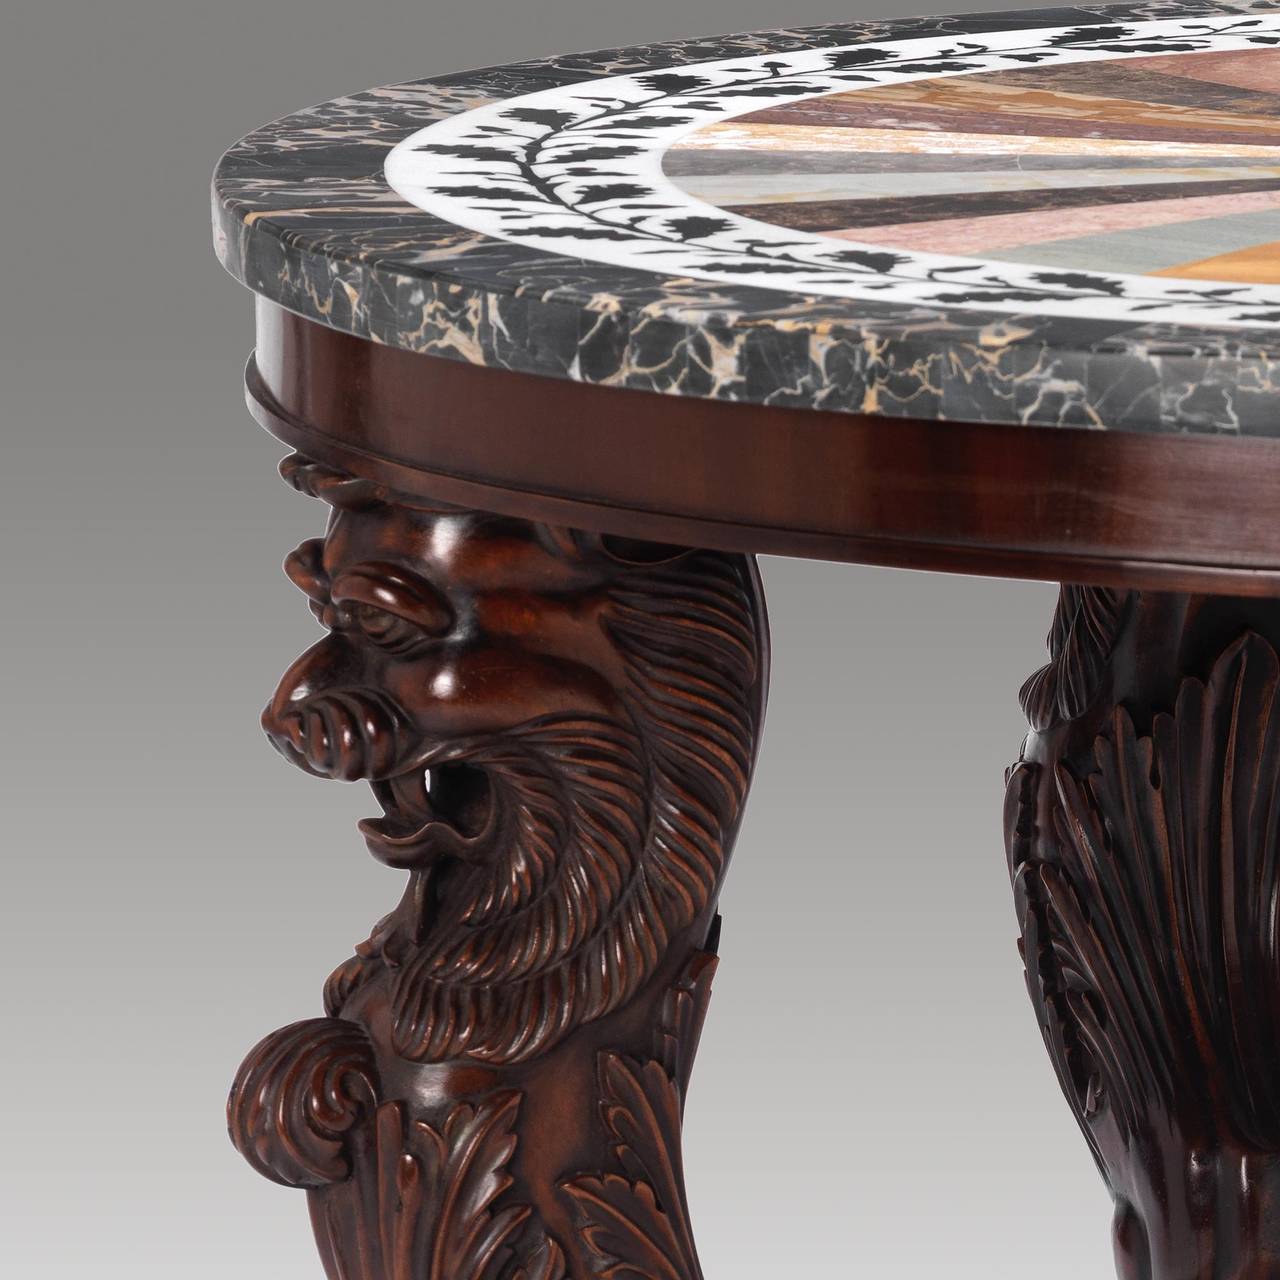 A fabulous quality Grand Tour inspired Regency design marble specimen topped carved mahogany centre table.

This table boasts the most fantastic color and patination complemented by an inlaid specimen marble top. The table takes its inspiration